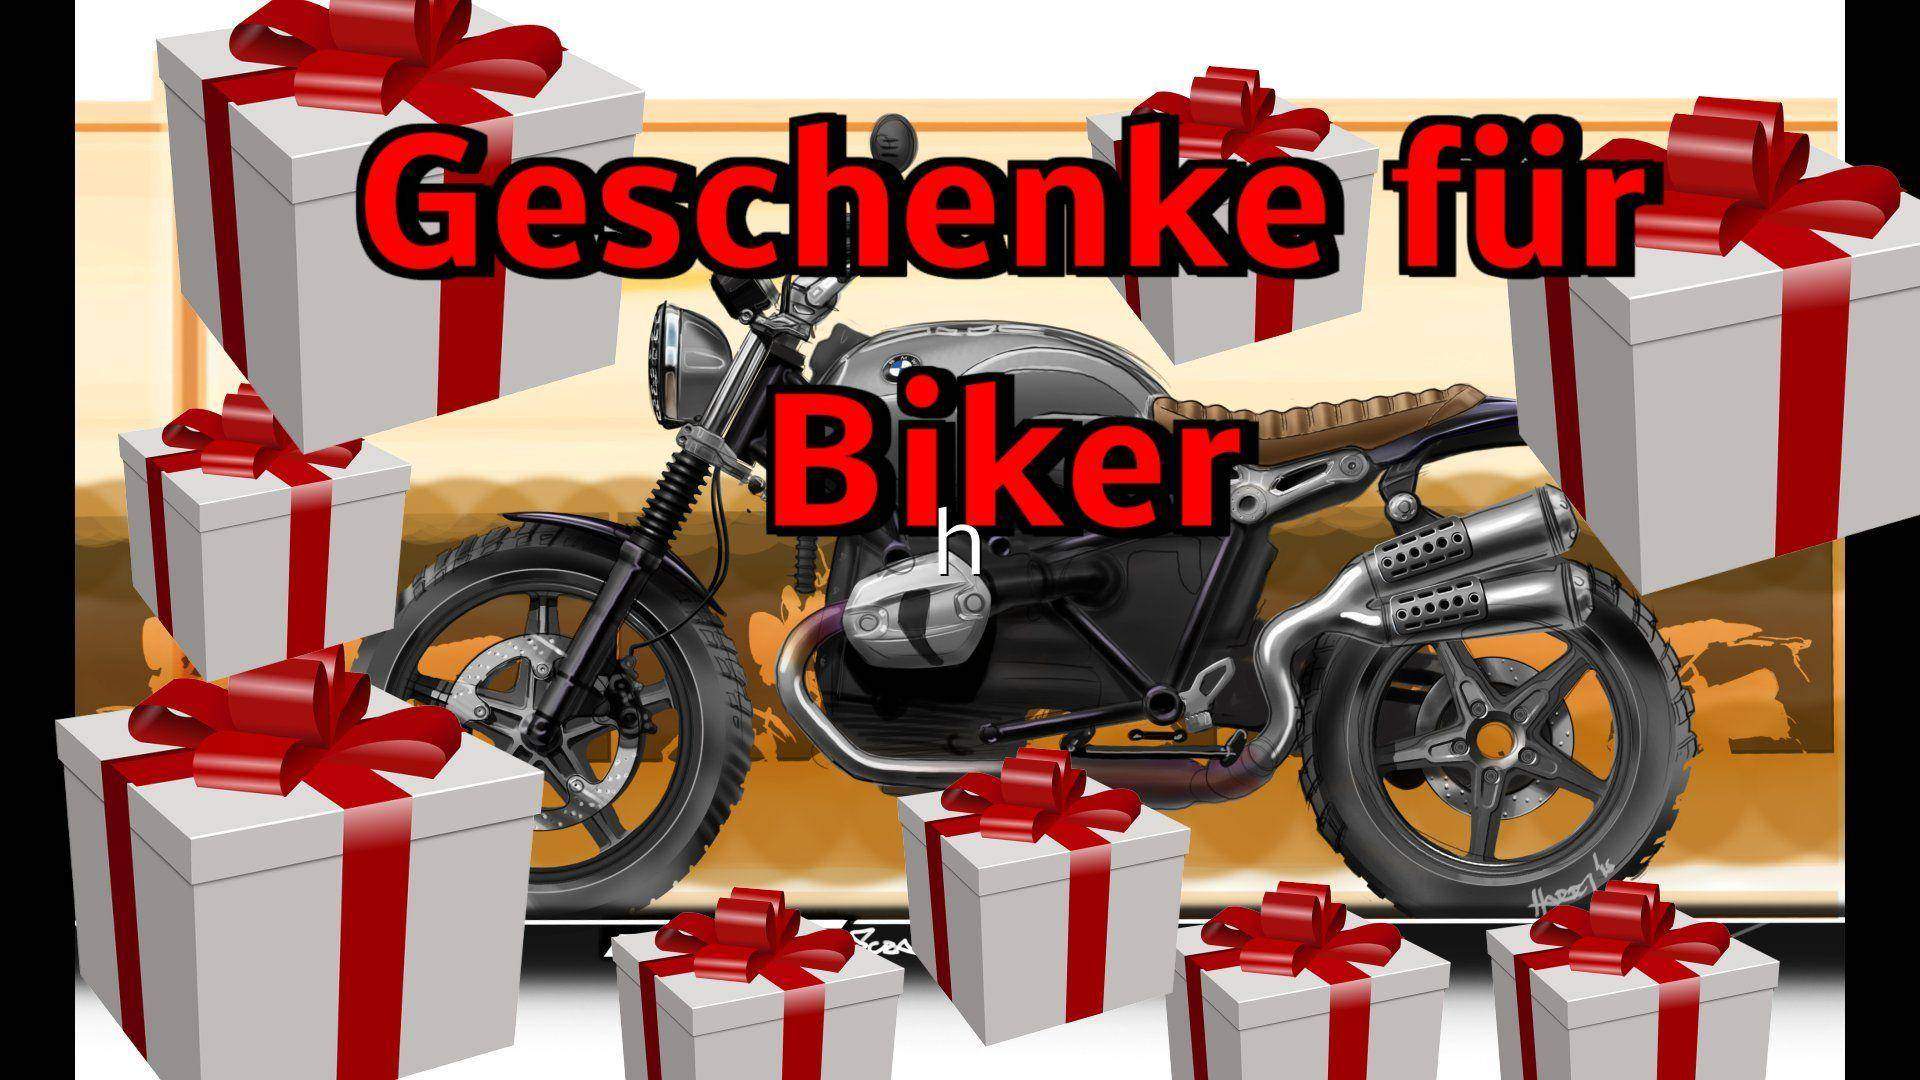 Christmas present for motorcyclists – presents for bikers